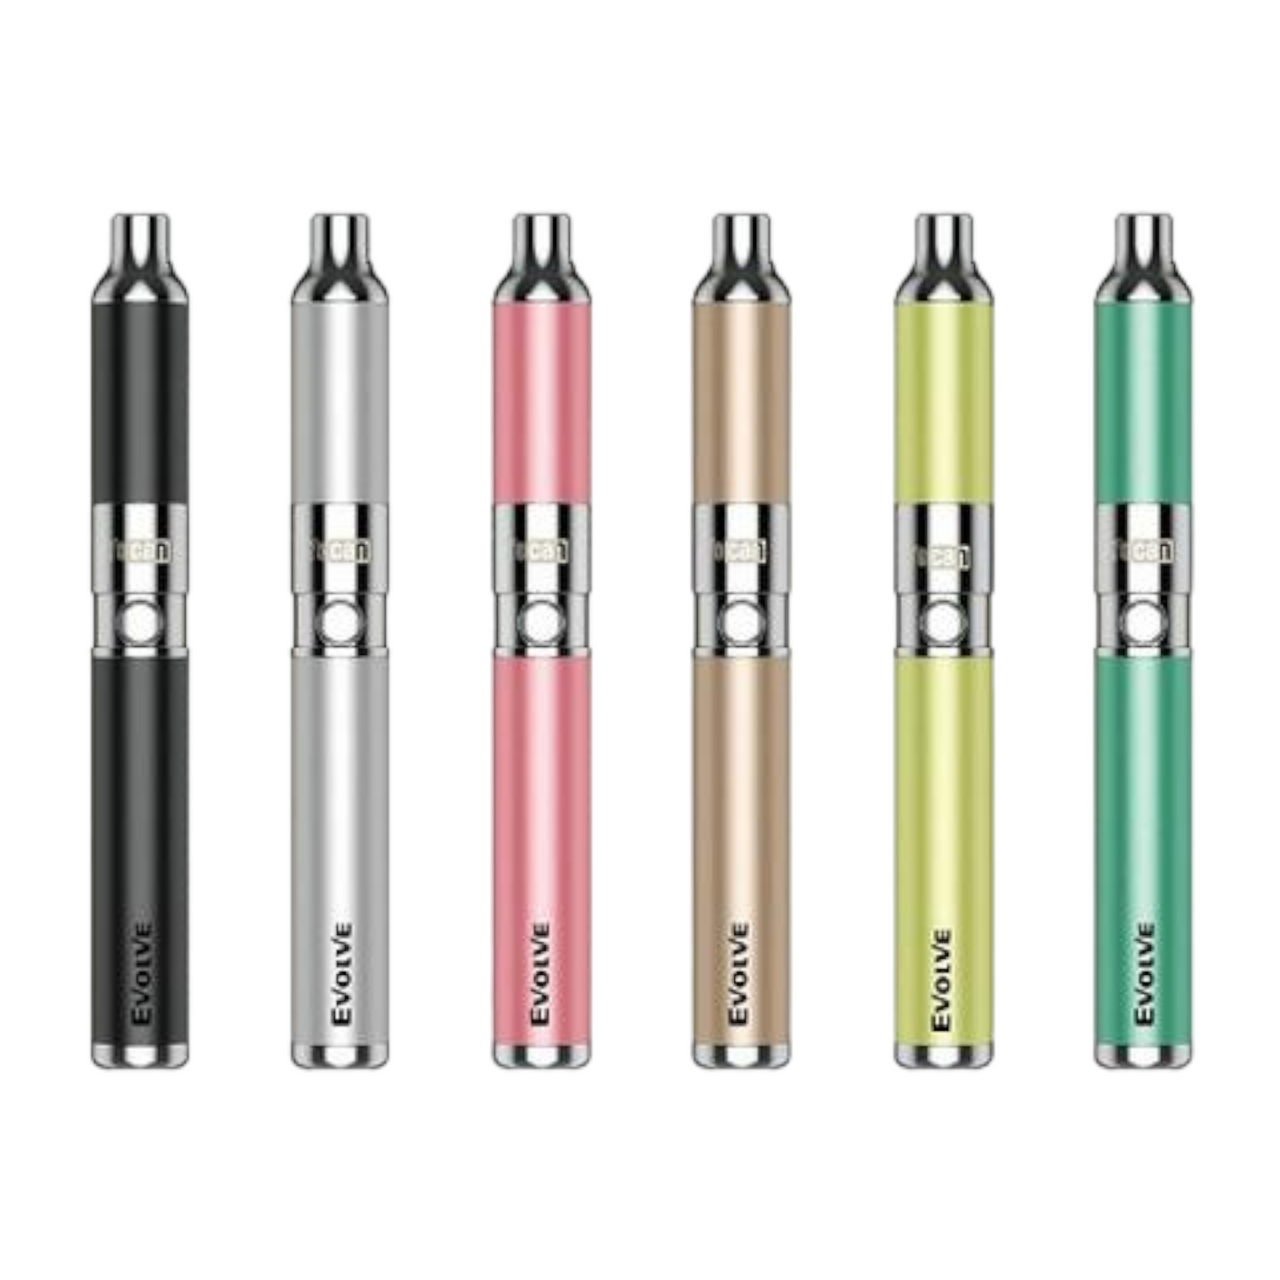 Yocan Vaporizer Selection for Dry Herb, Wax & Oil